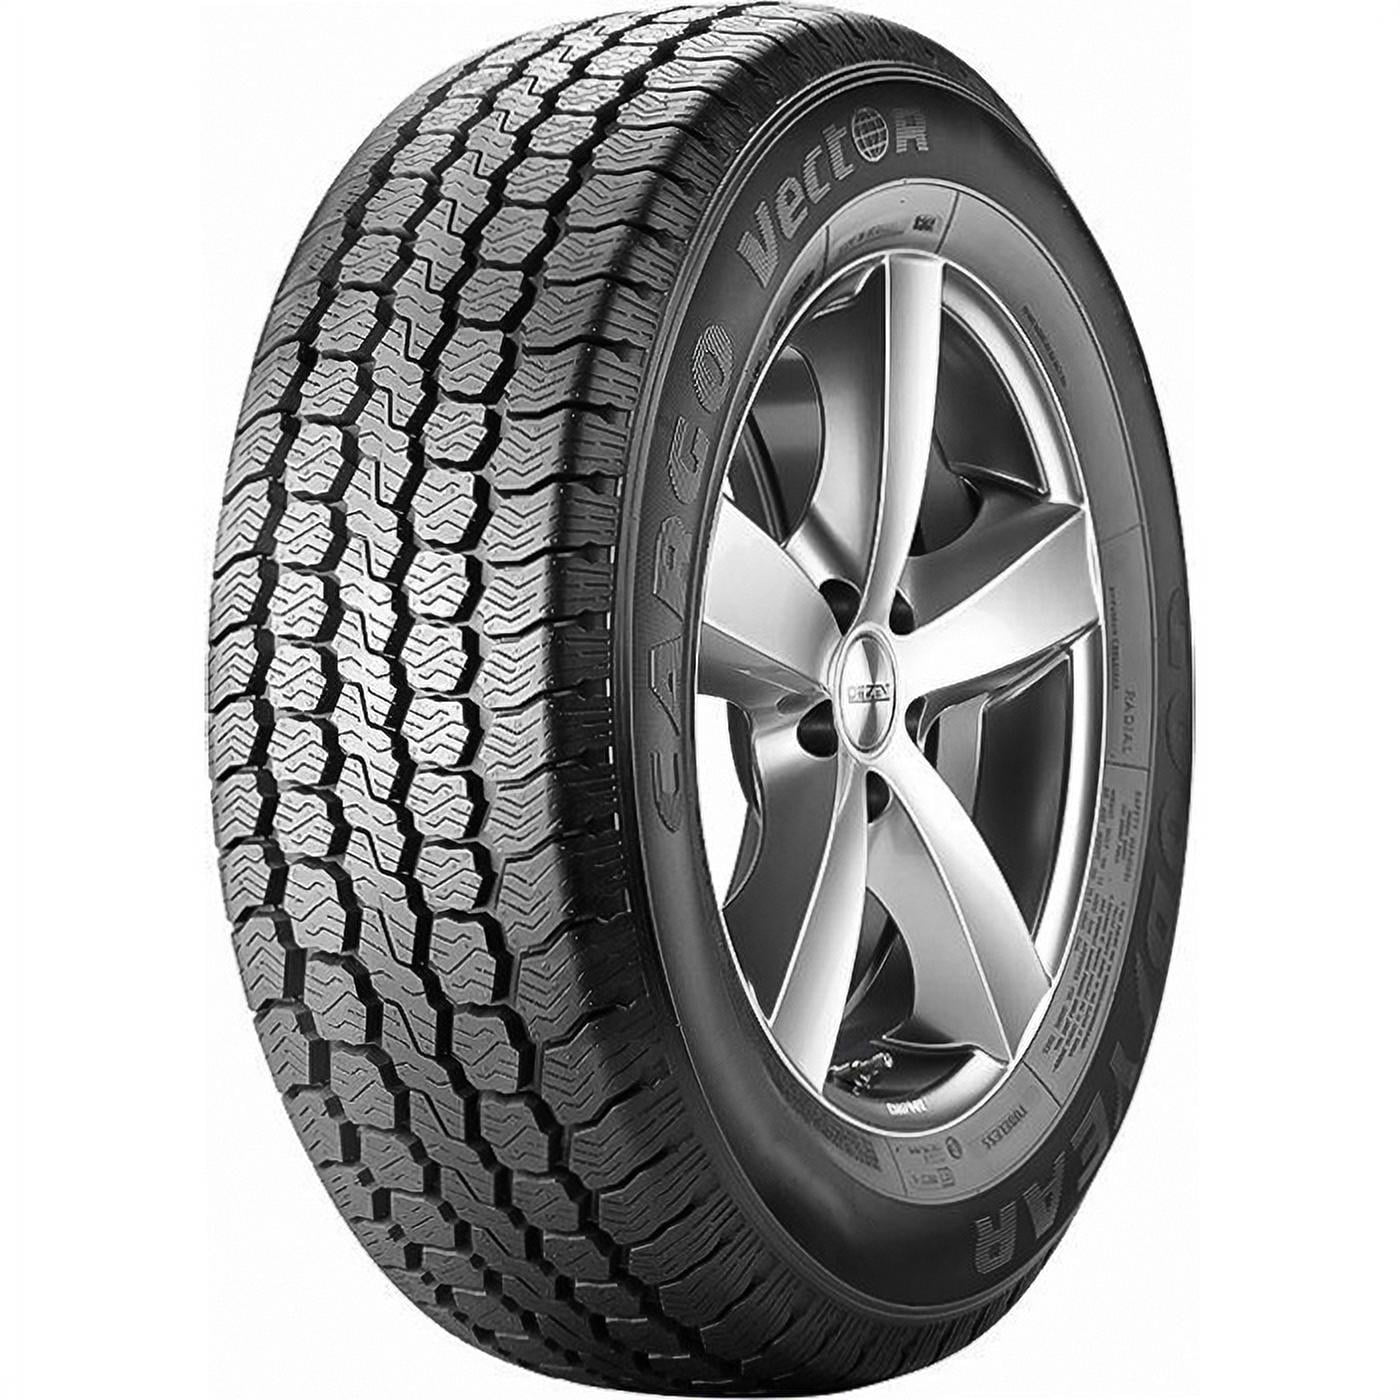 D Vector Commercial Load 285/65R16 8 Cargo Tire Ply Goodyear